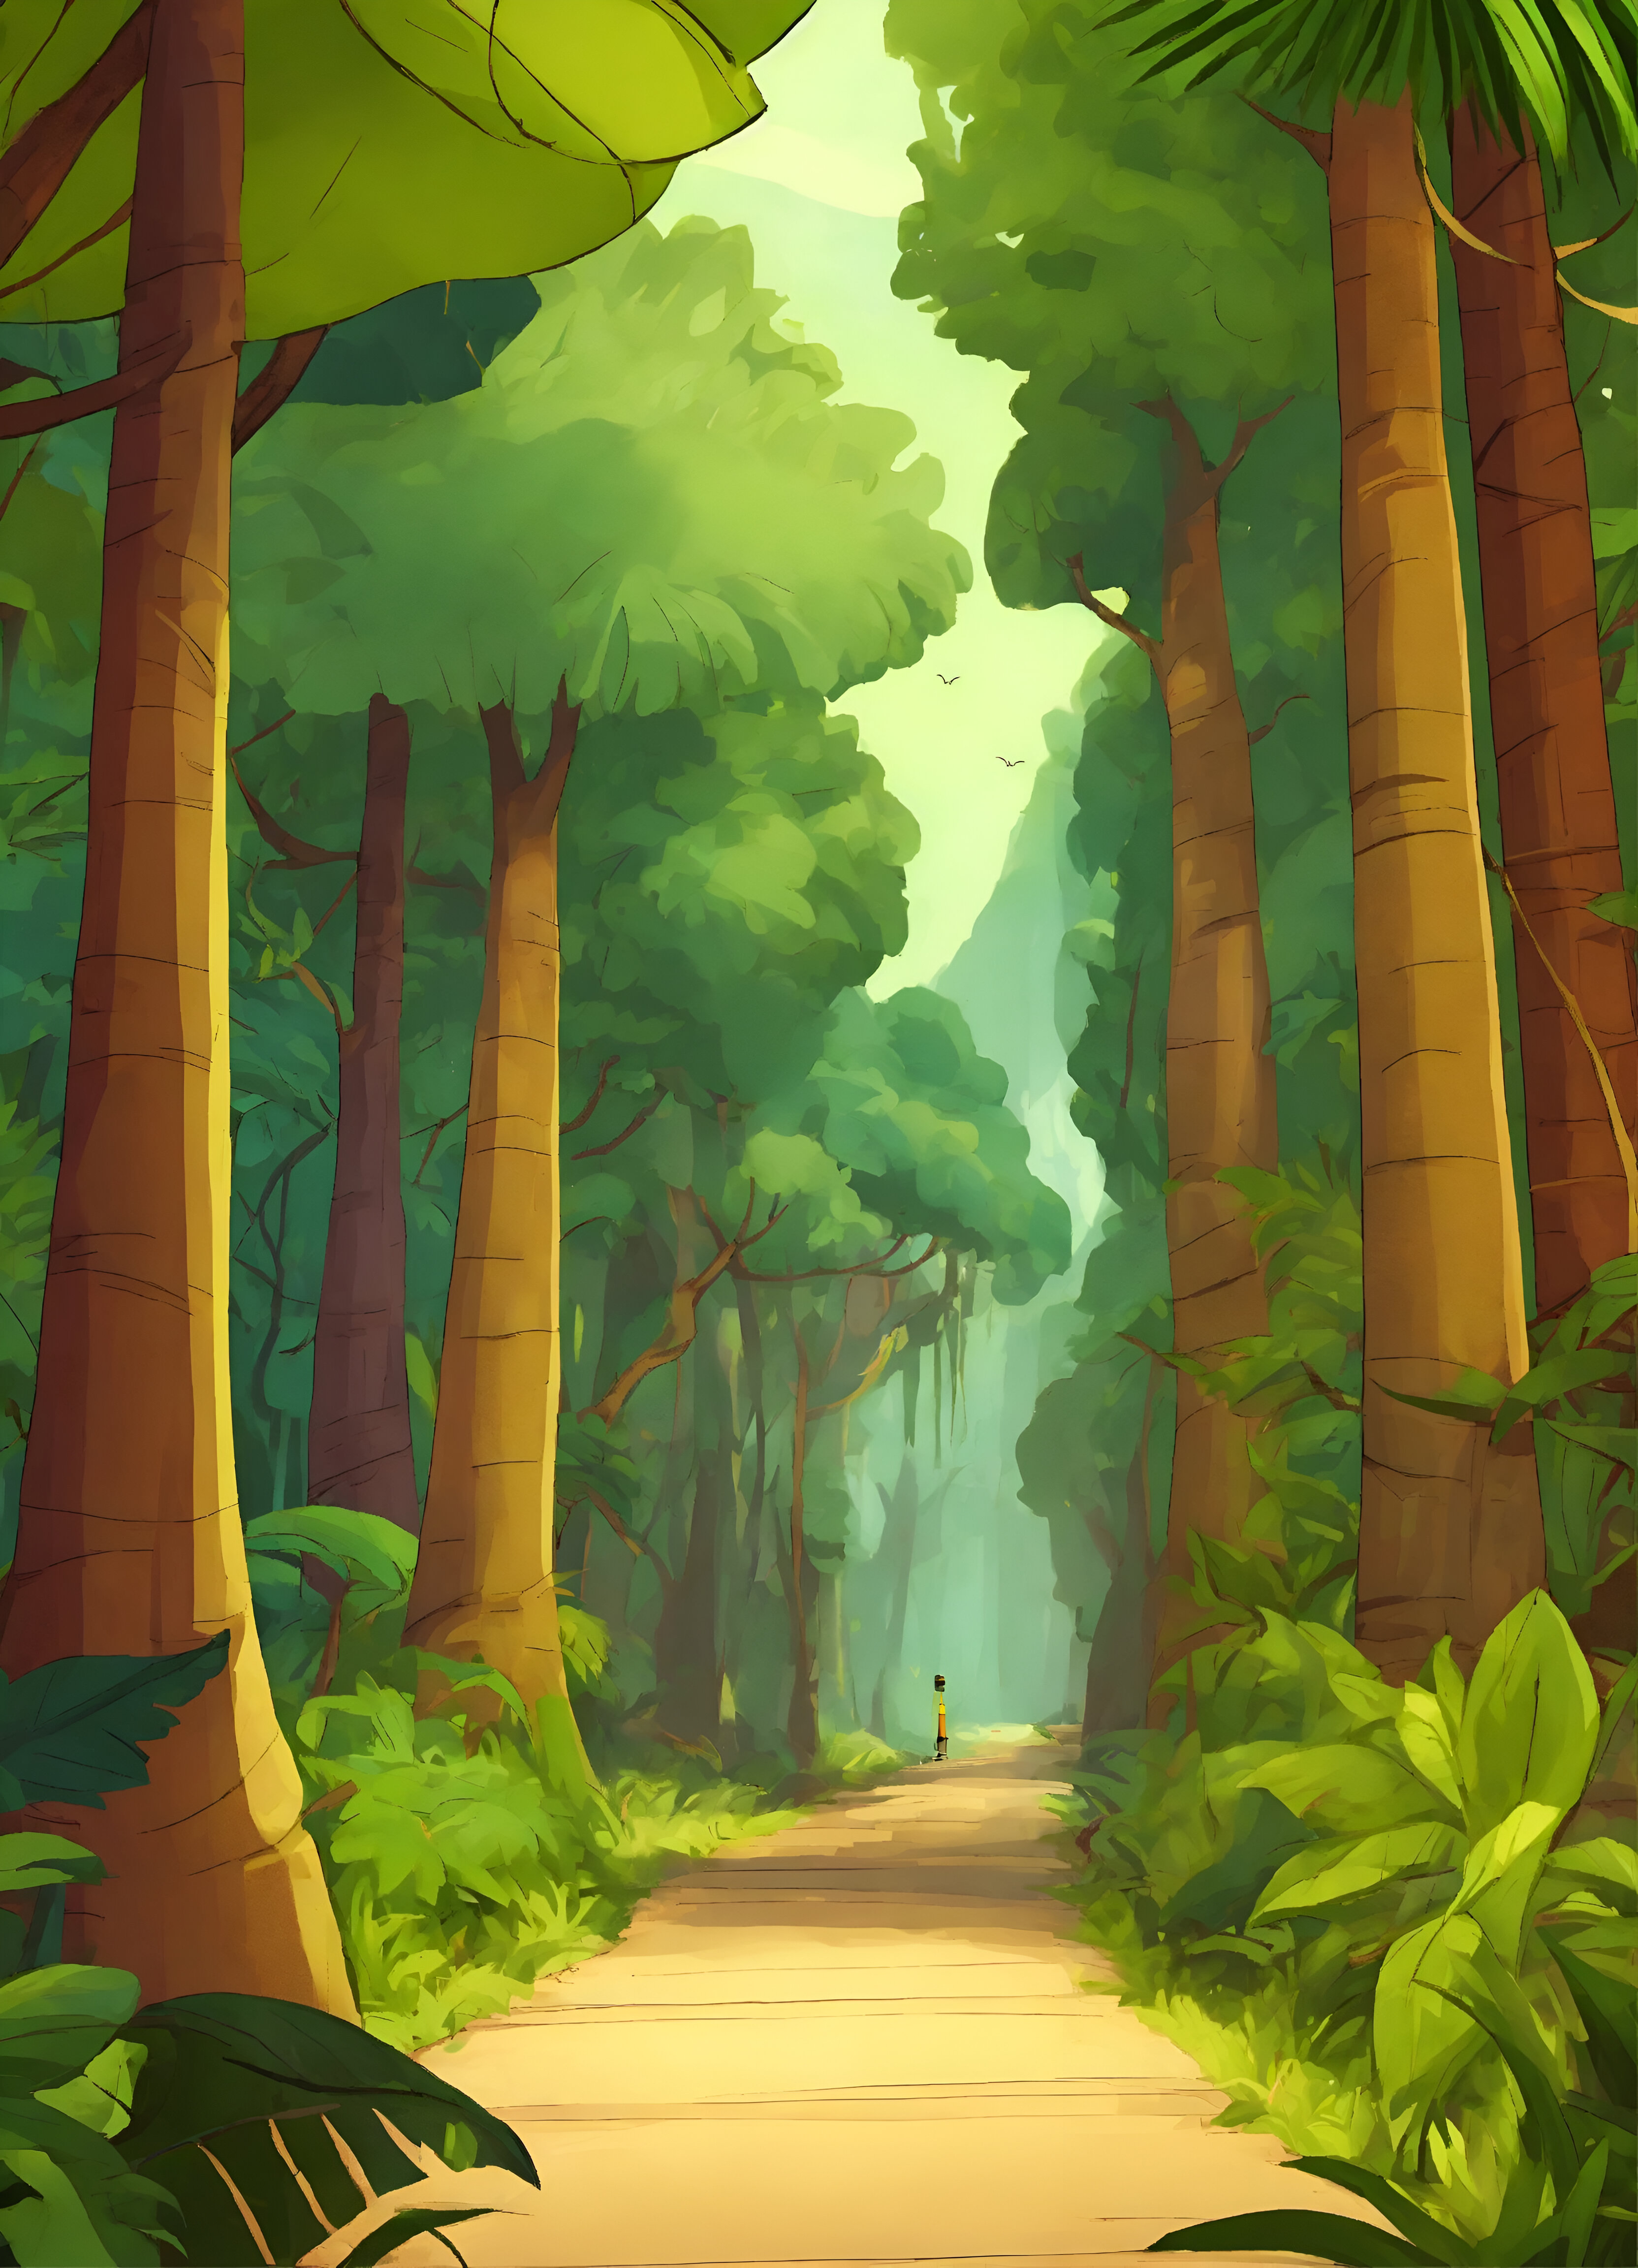 Green Forest